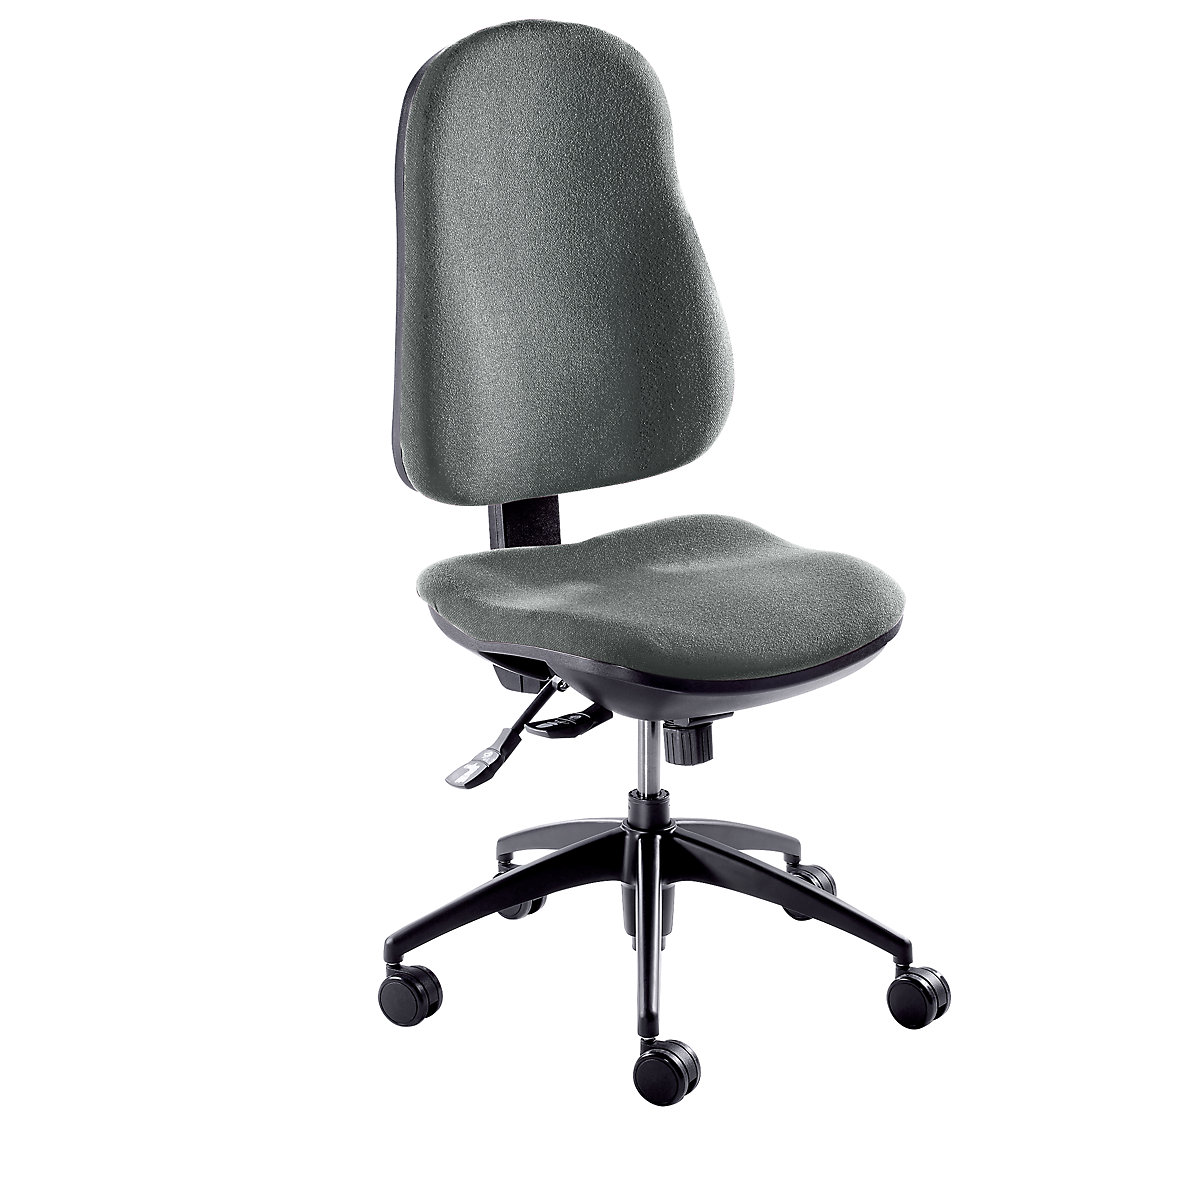 Ergonomic swivel chair – eurokraft pro, point synchronous mechanism, without arm rests, grey fabric covering-2